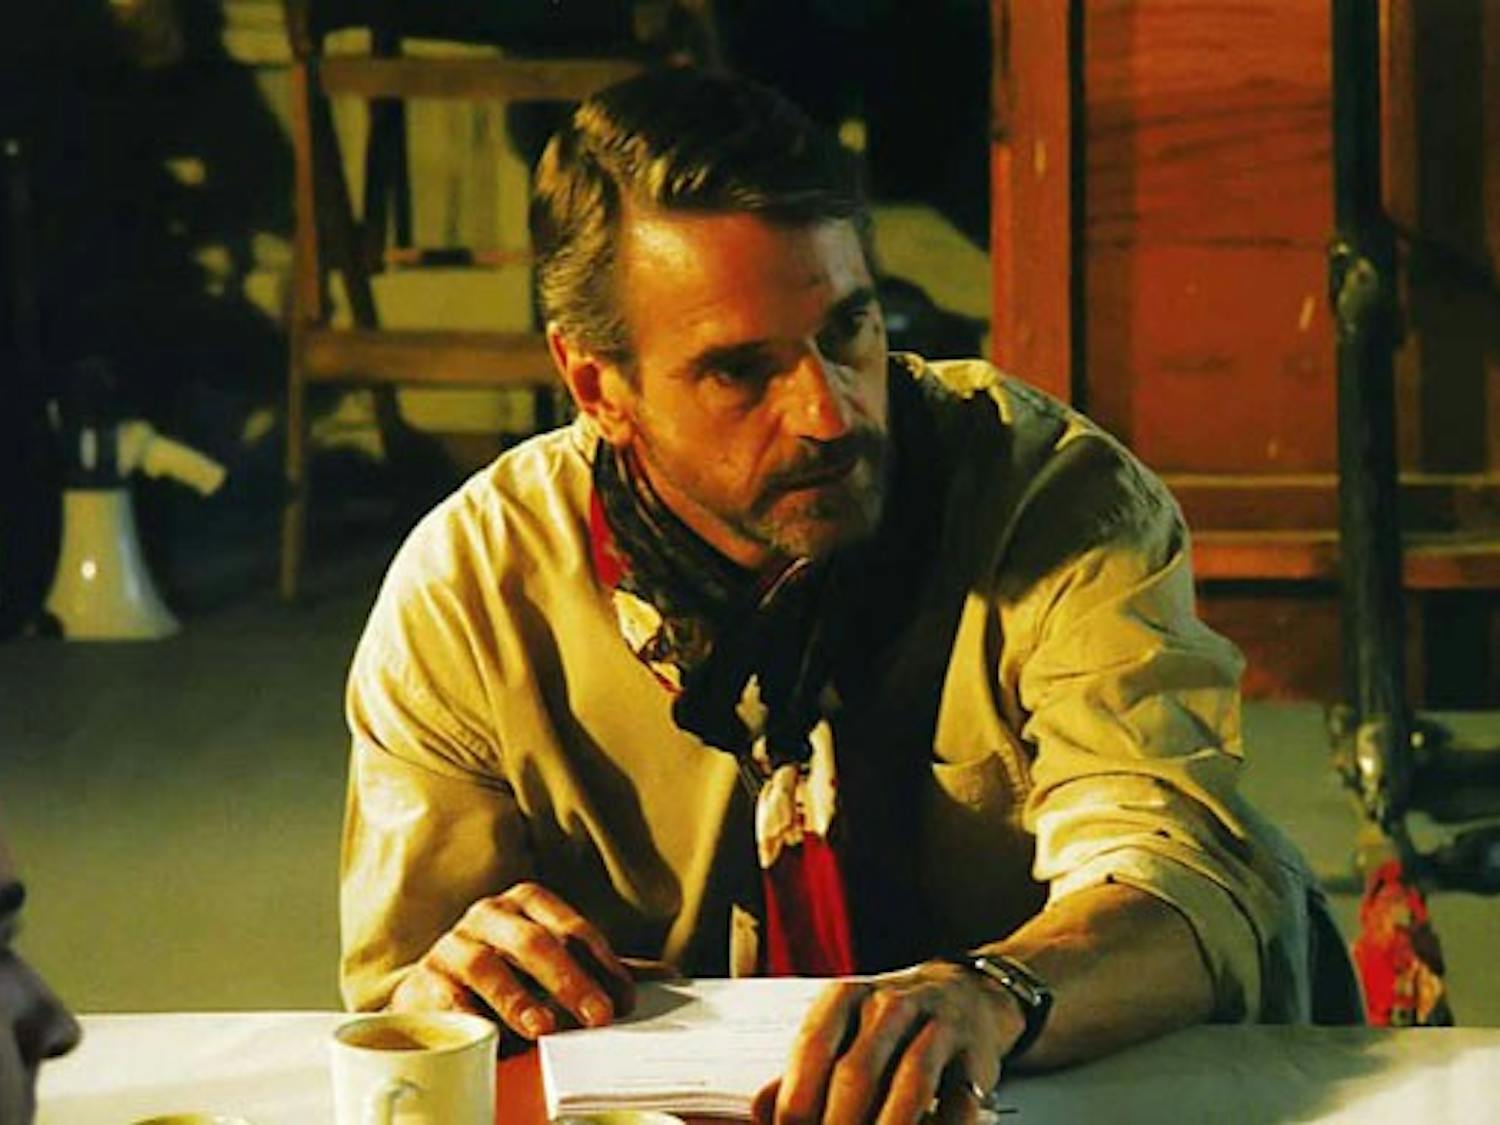 Jeremy Irons as Kingsley Stewart in "Inland Empire."